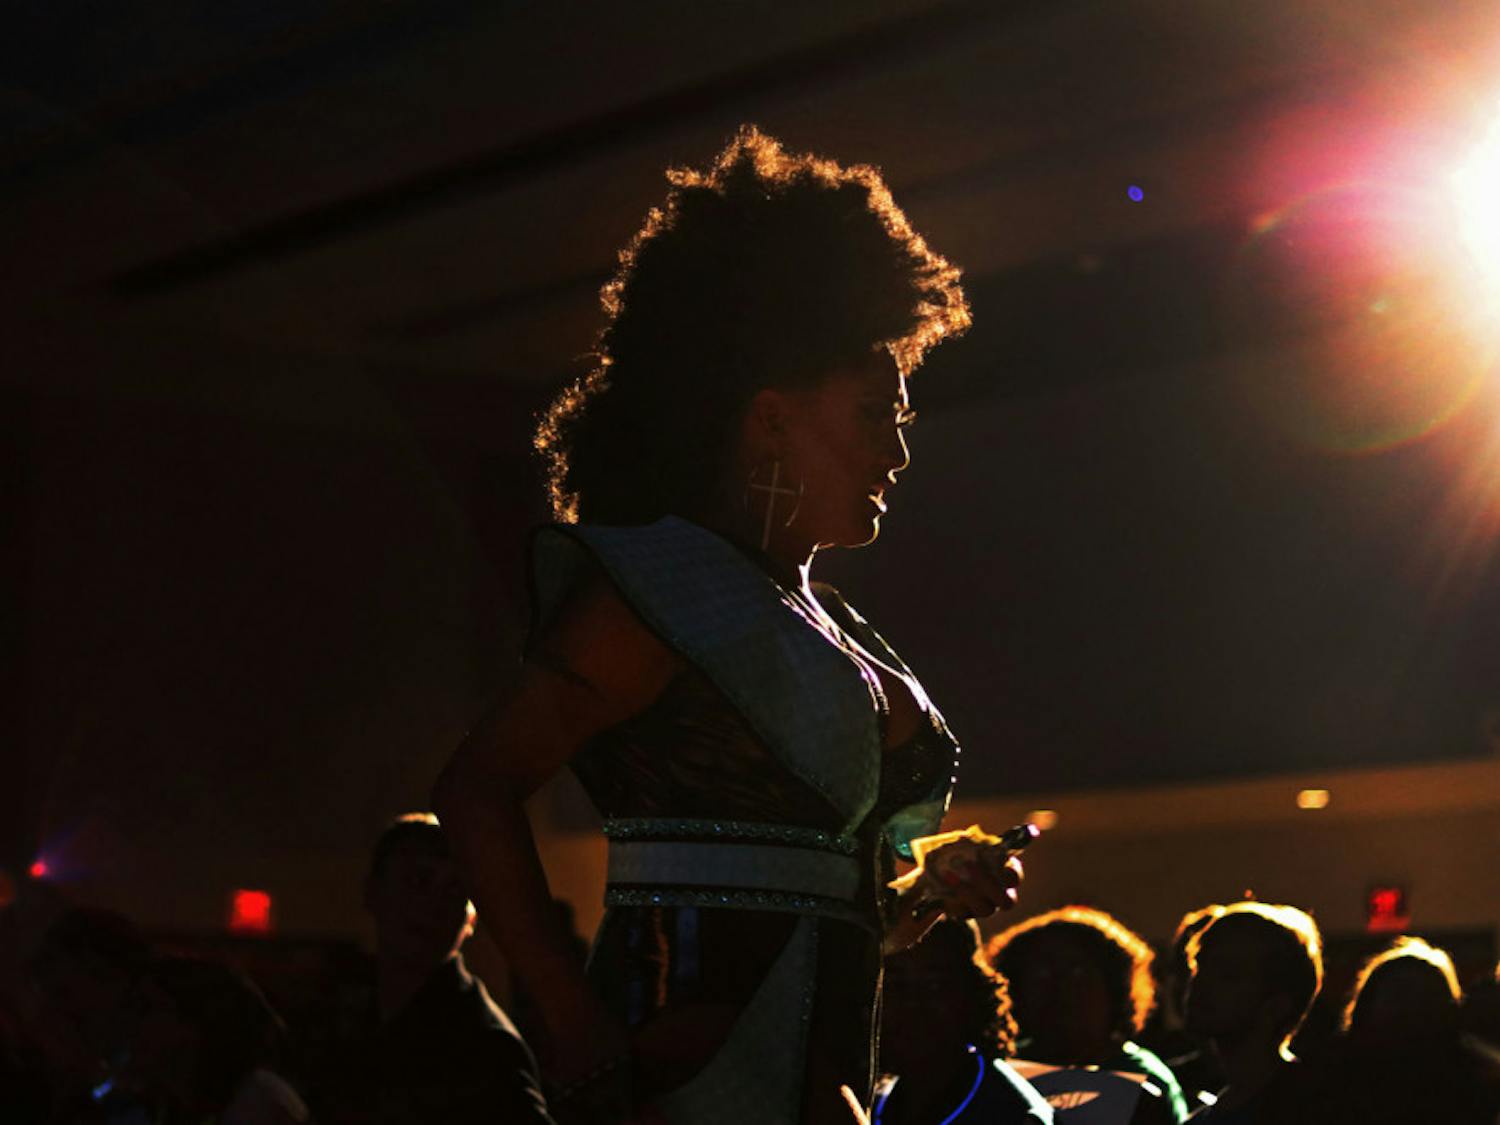 Faith Taylor walks into the crowd of over 250 people Monday night during the Illuminate show in the Rion Ballroom at the Reitz Union.&nbsp;